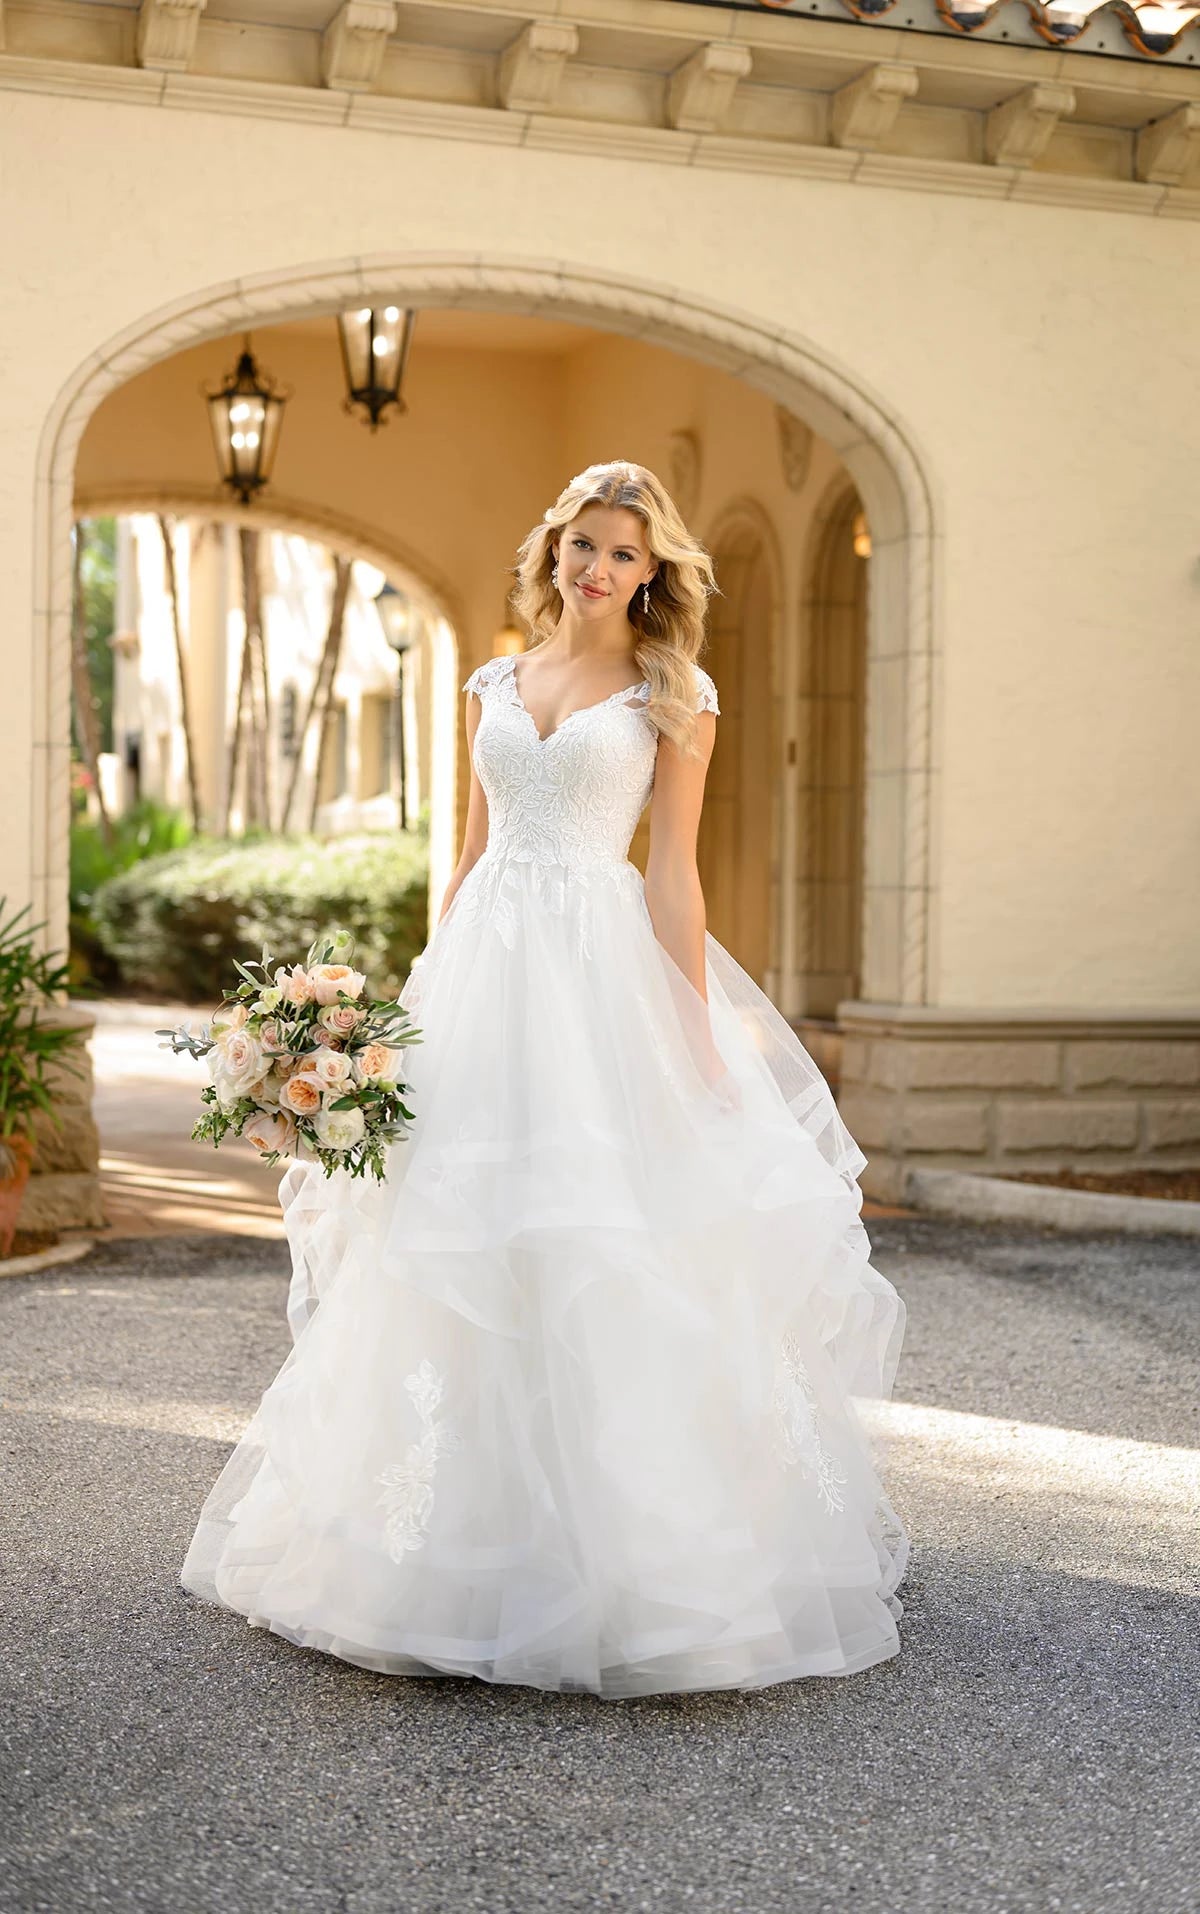 Classic Princess Ballgown with Cap Sleeves - 7219